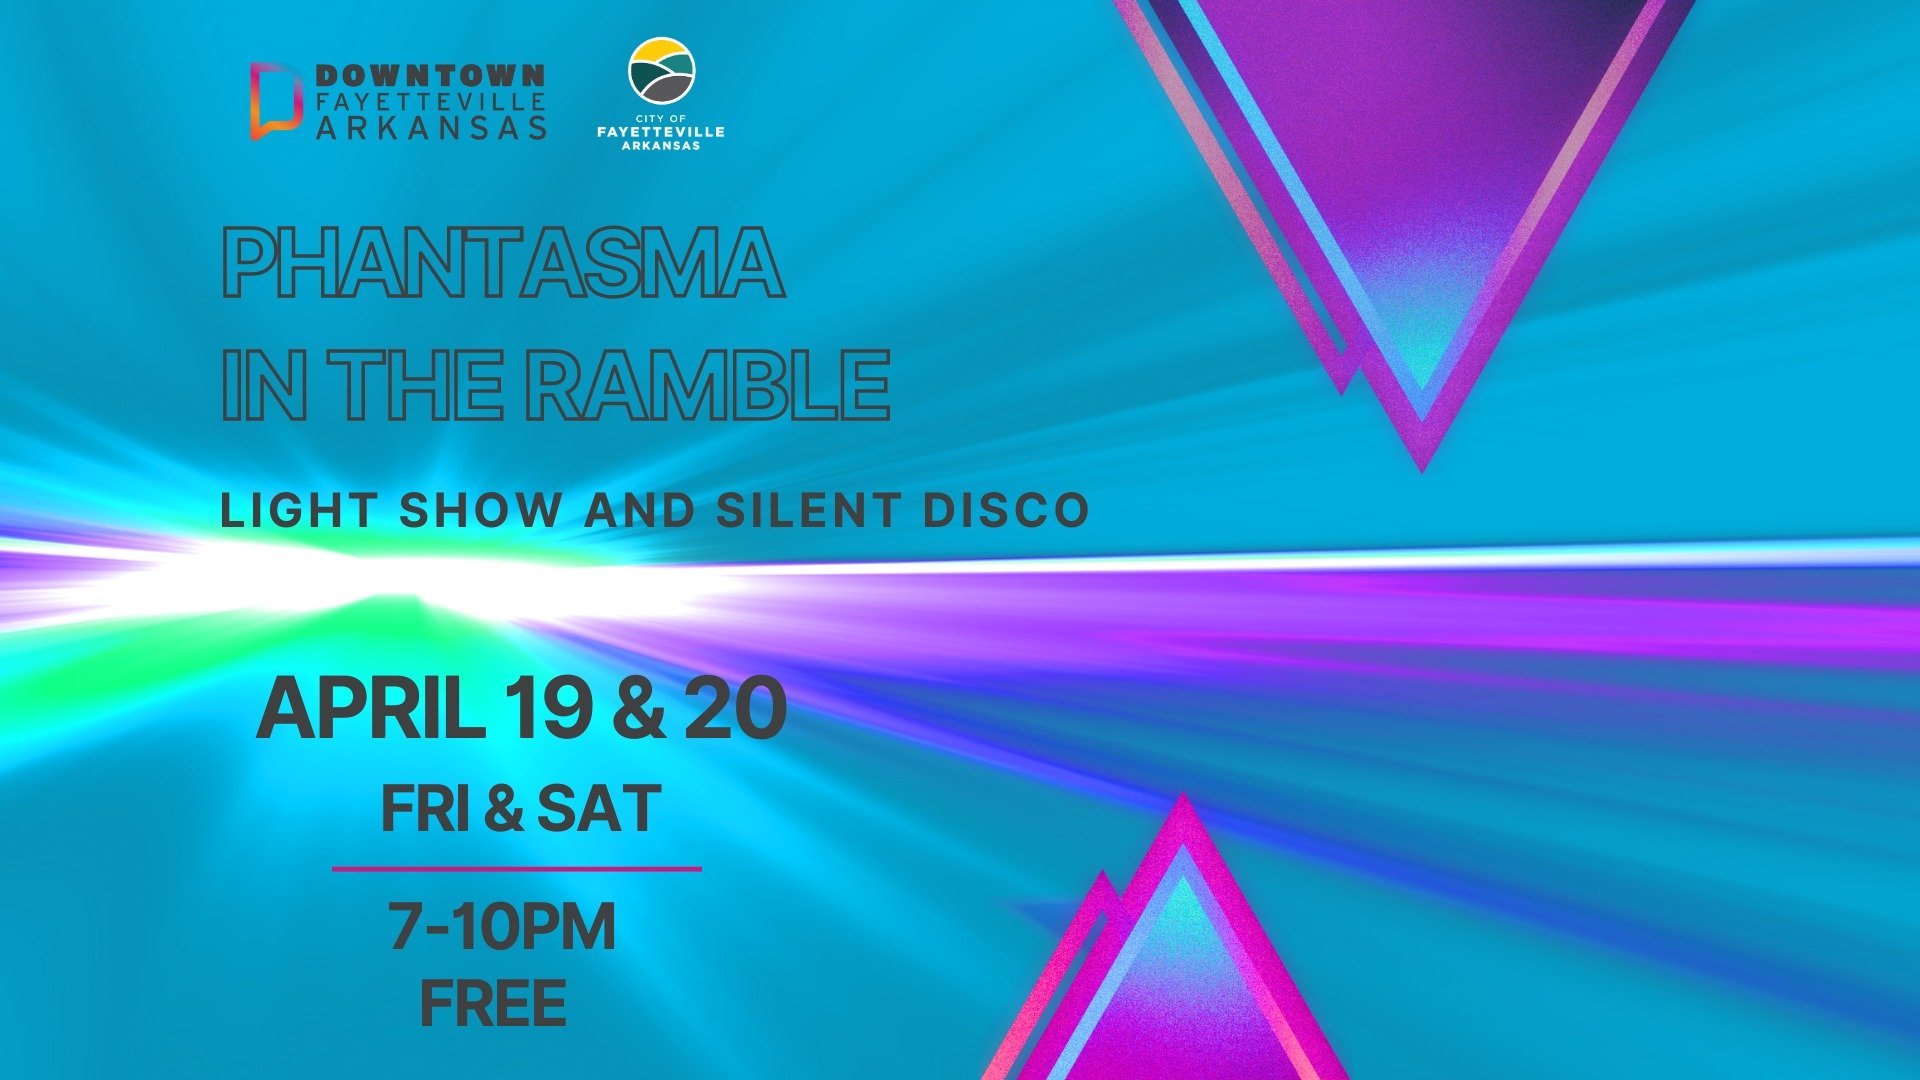 Laser light show, silent disco event to return to Lower Ramble next month